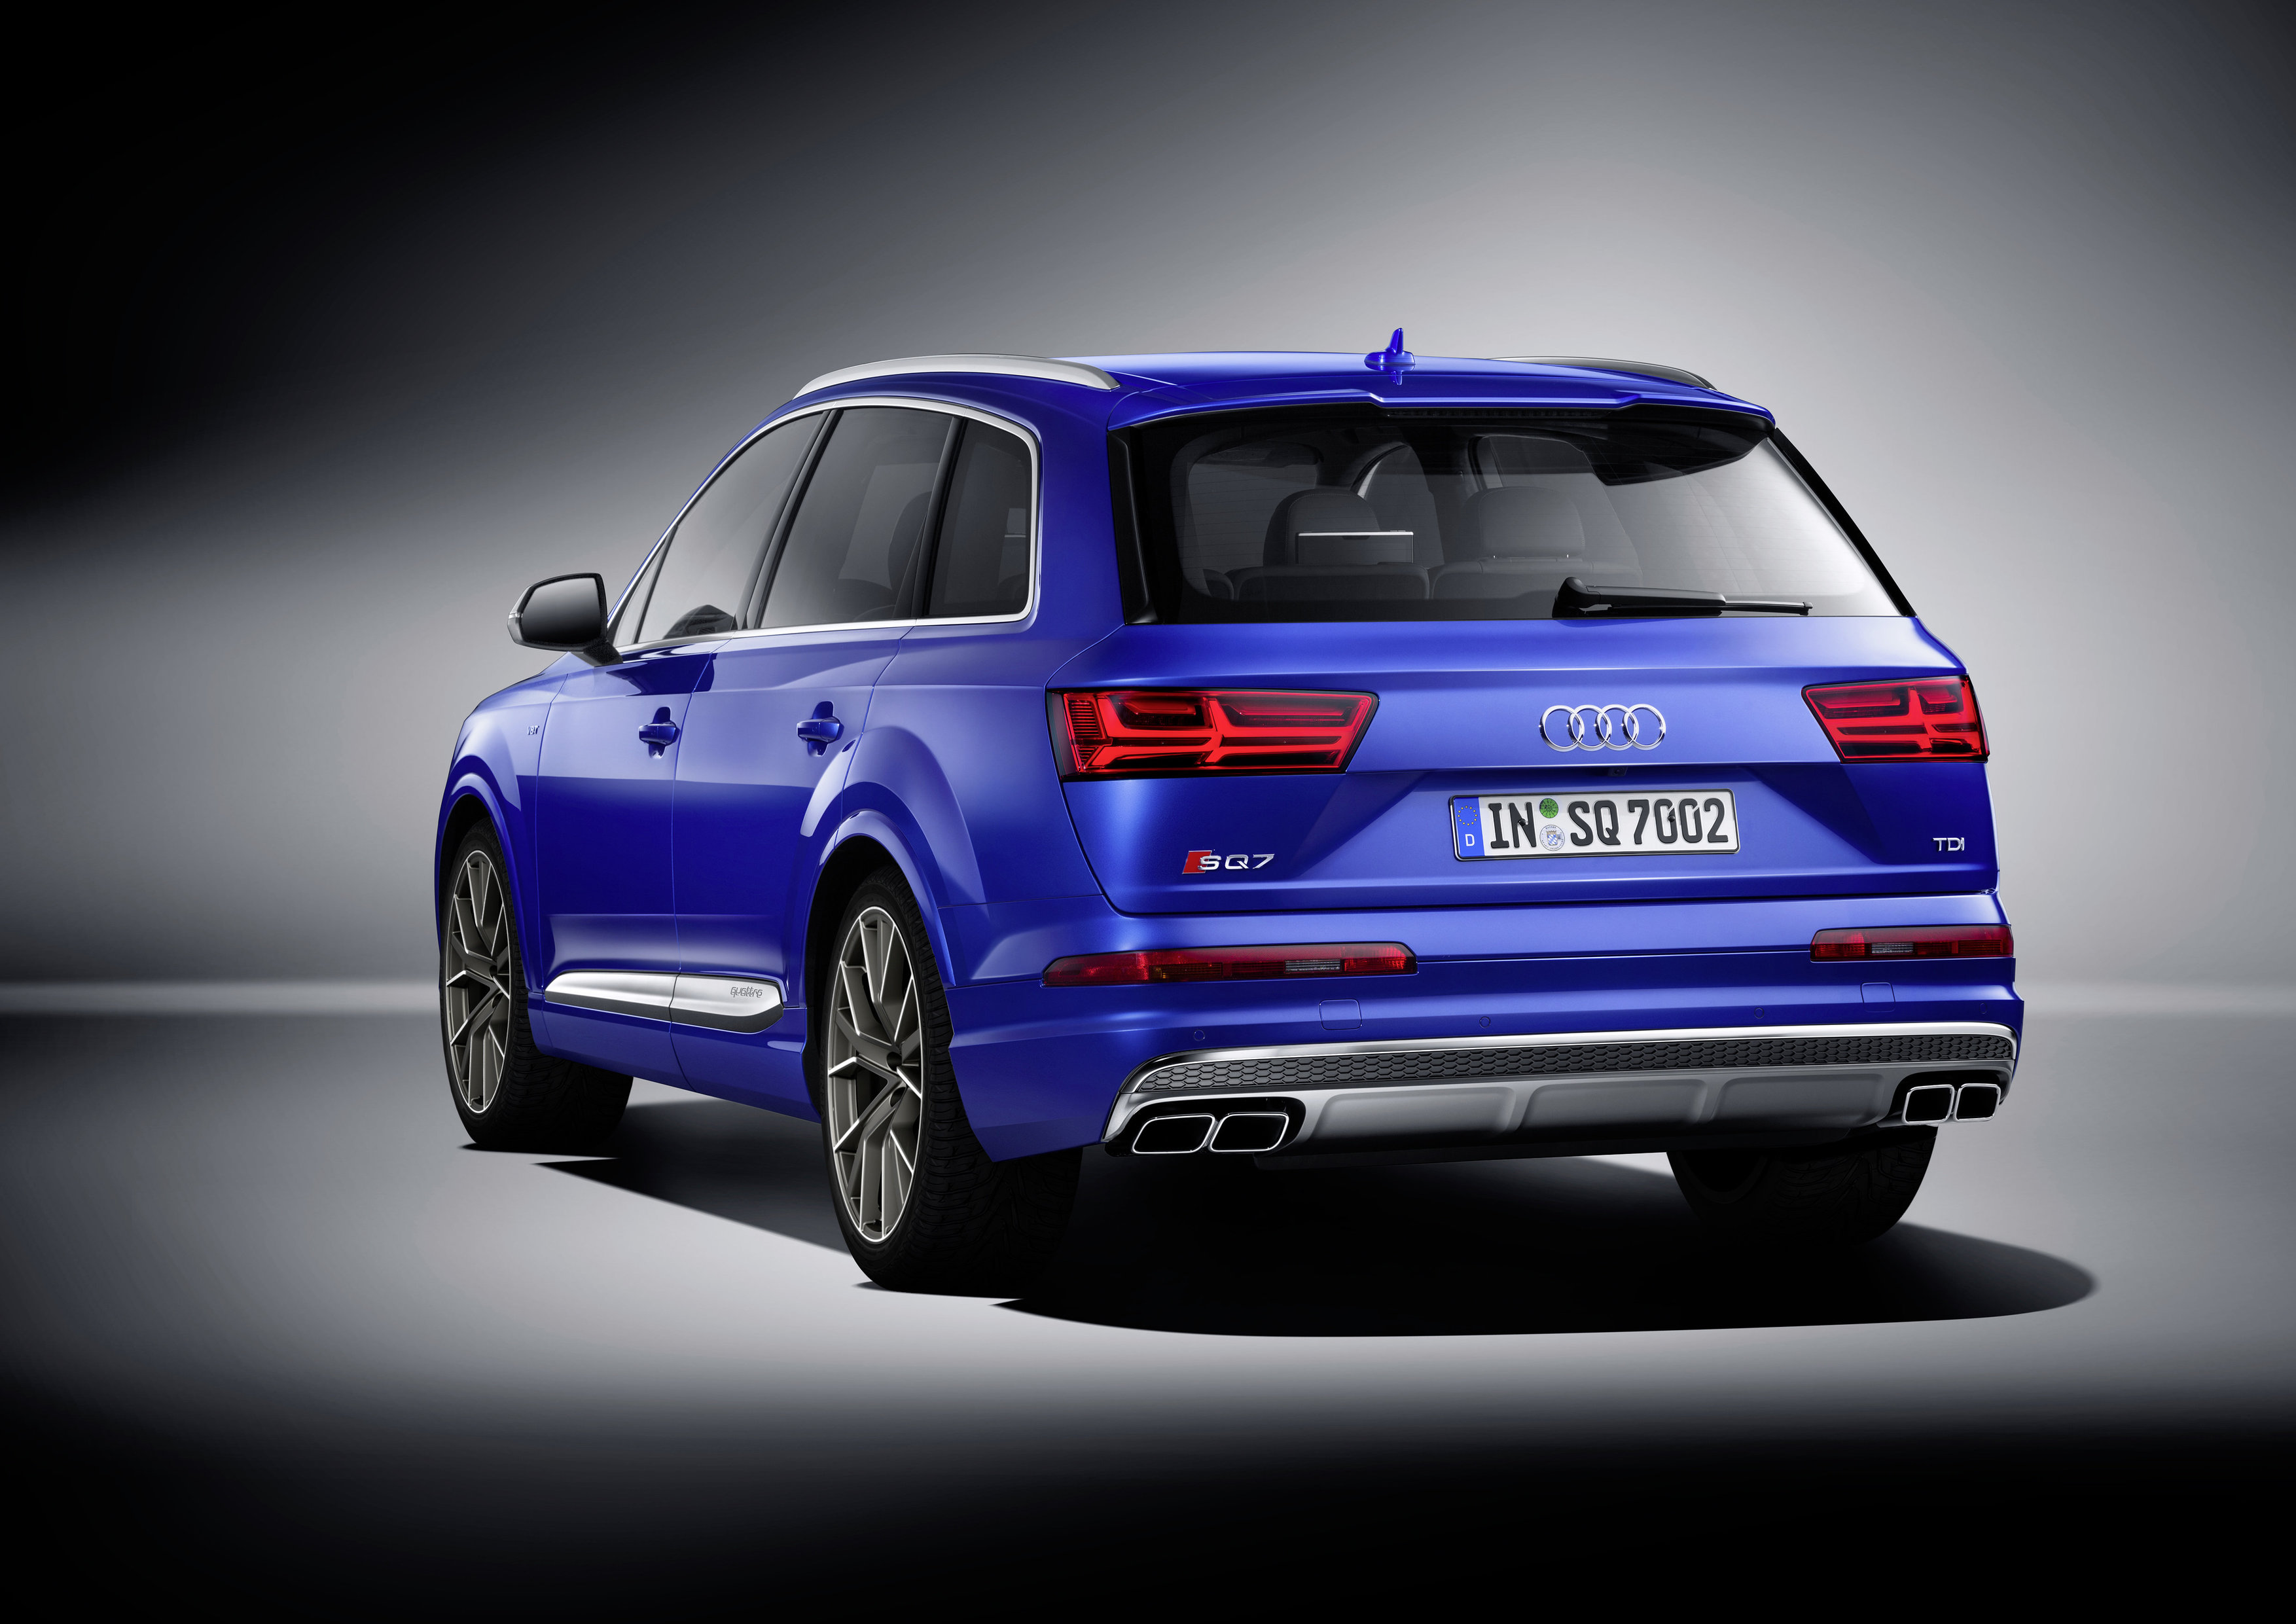 Audi SQ7 exterior restyling